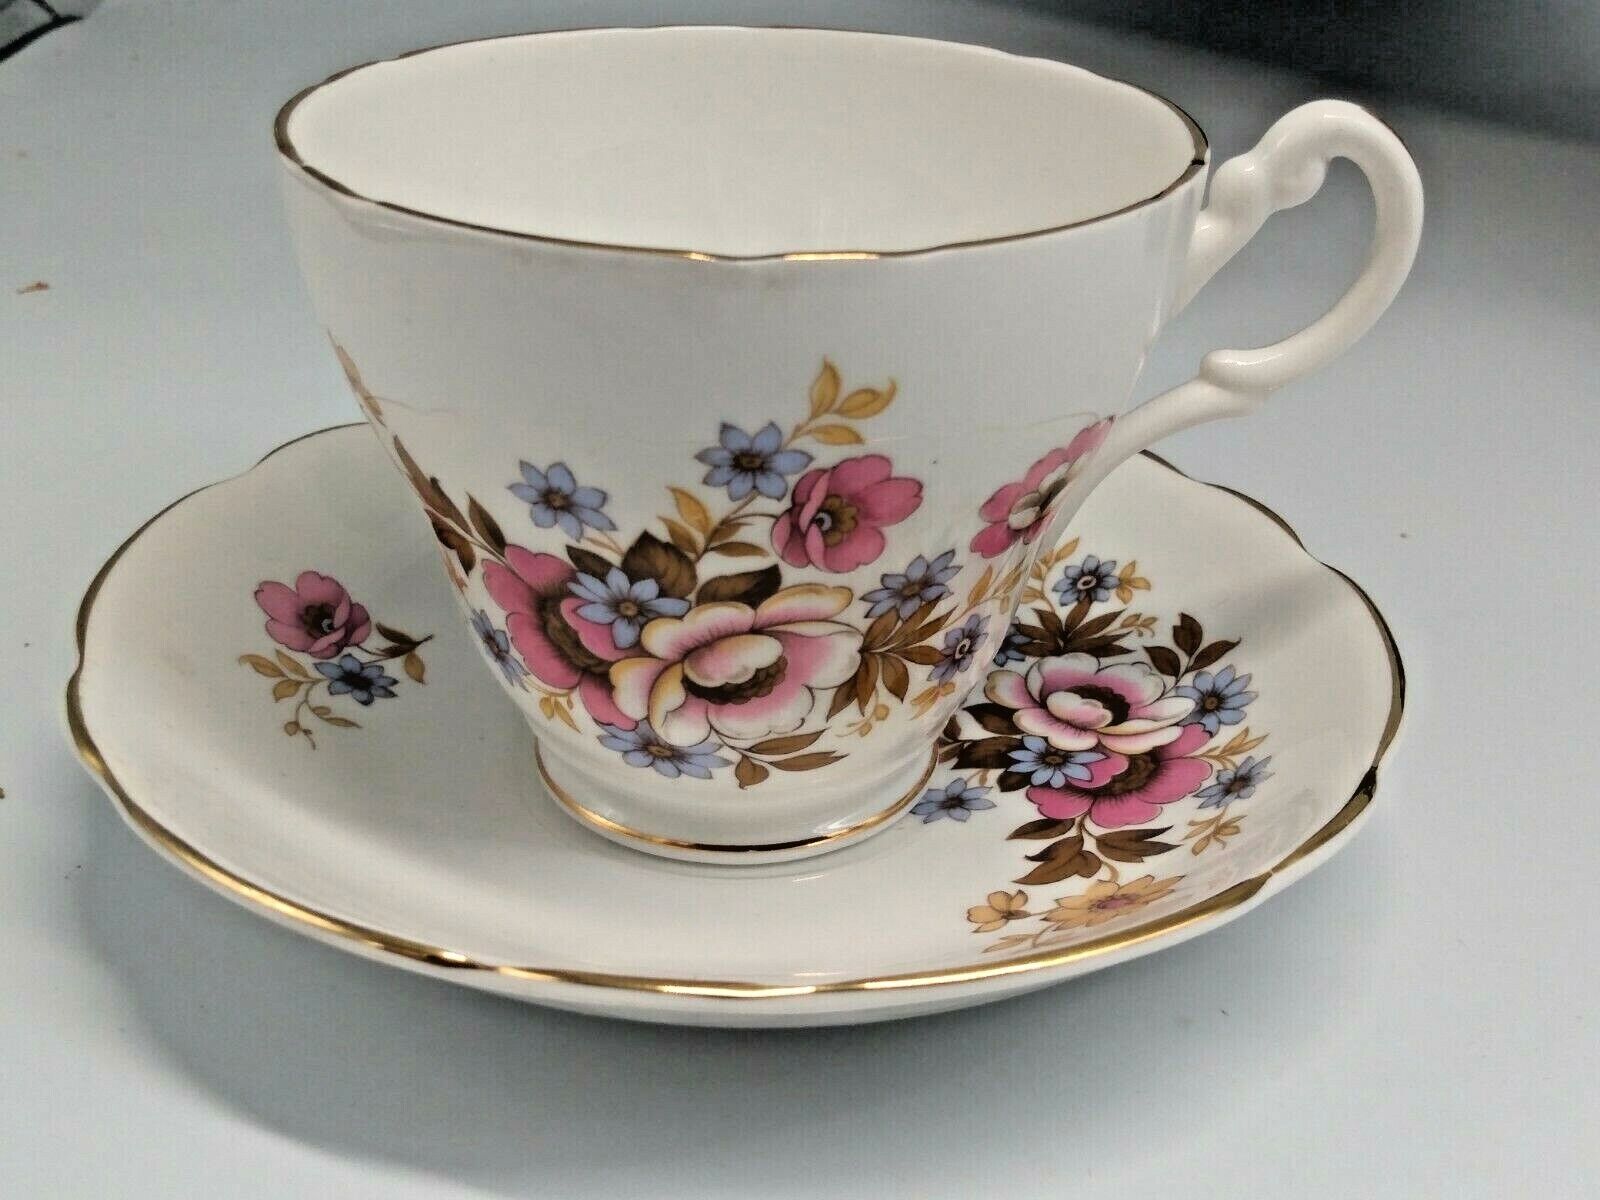 Royal Ascot Bone China Footed Cup & Saucer wide mouth cup 3 1/2